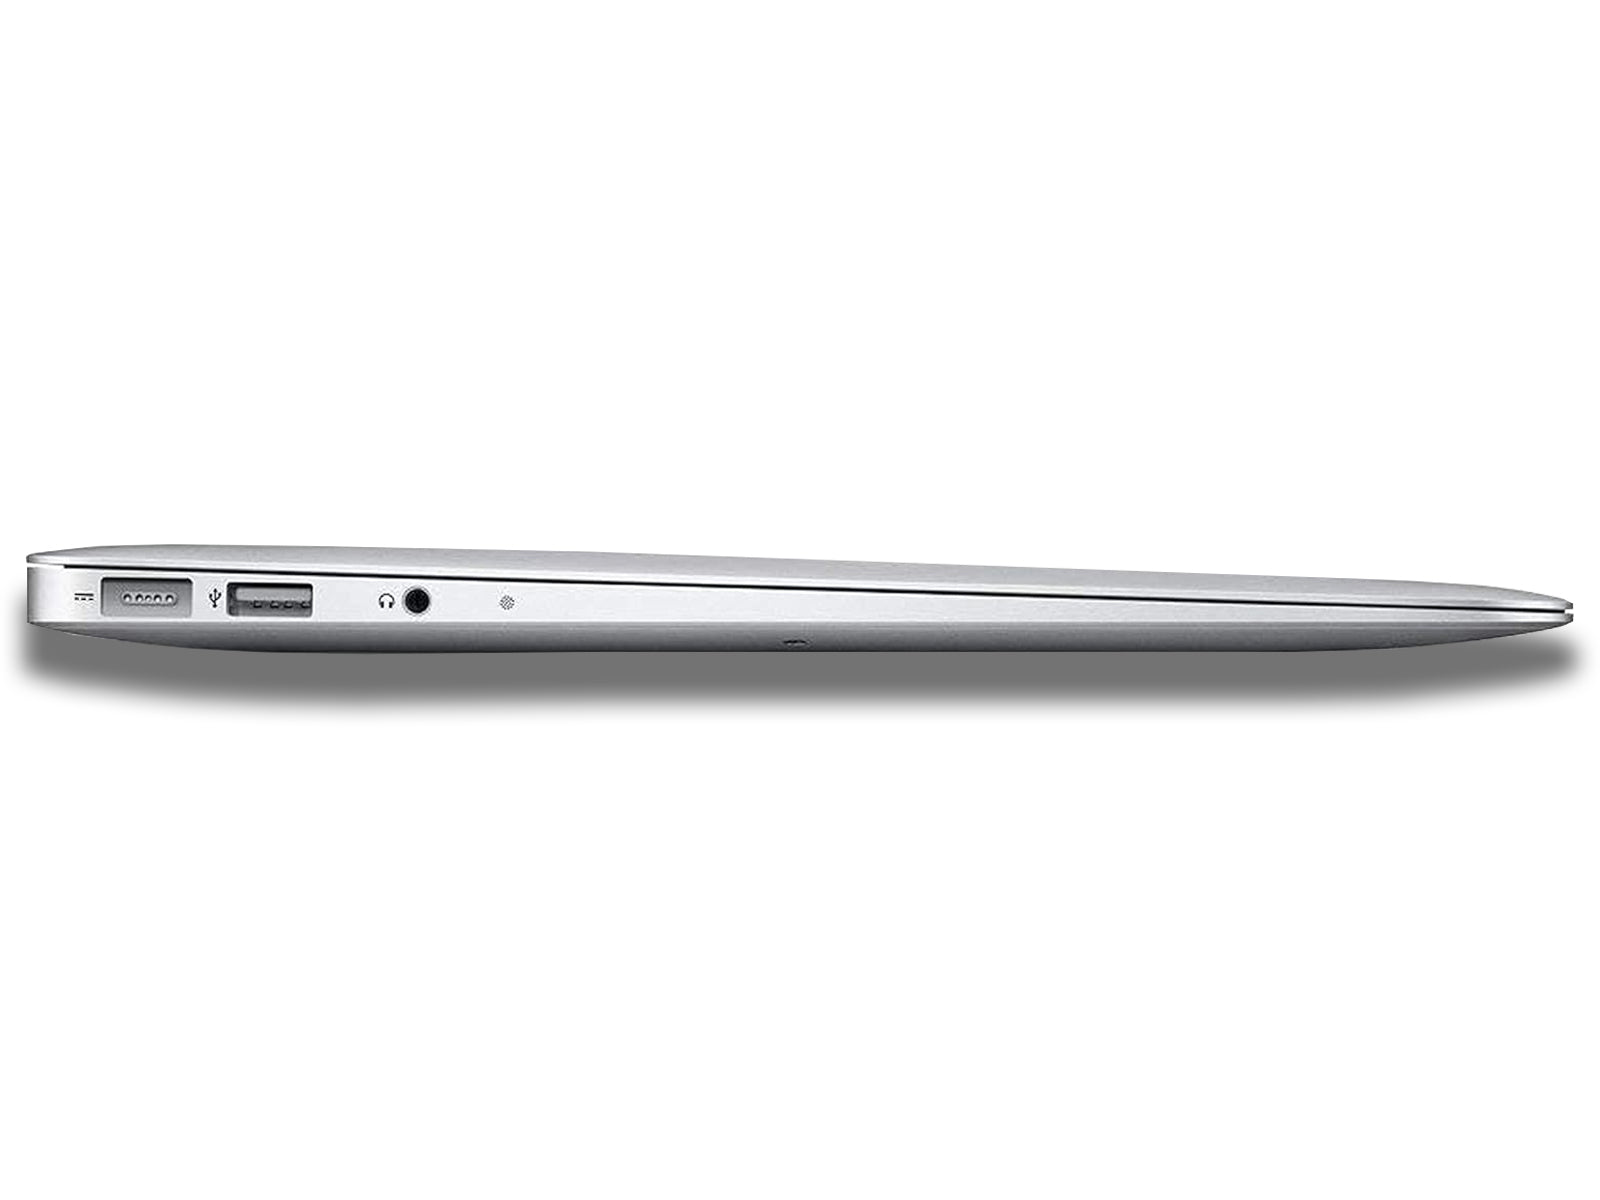 Image shows a side view of the Apple MacBook Air